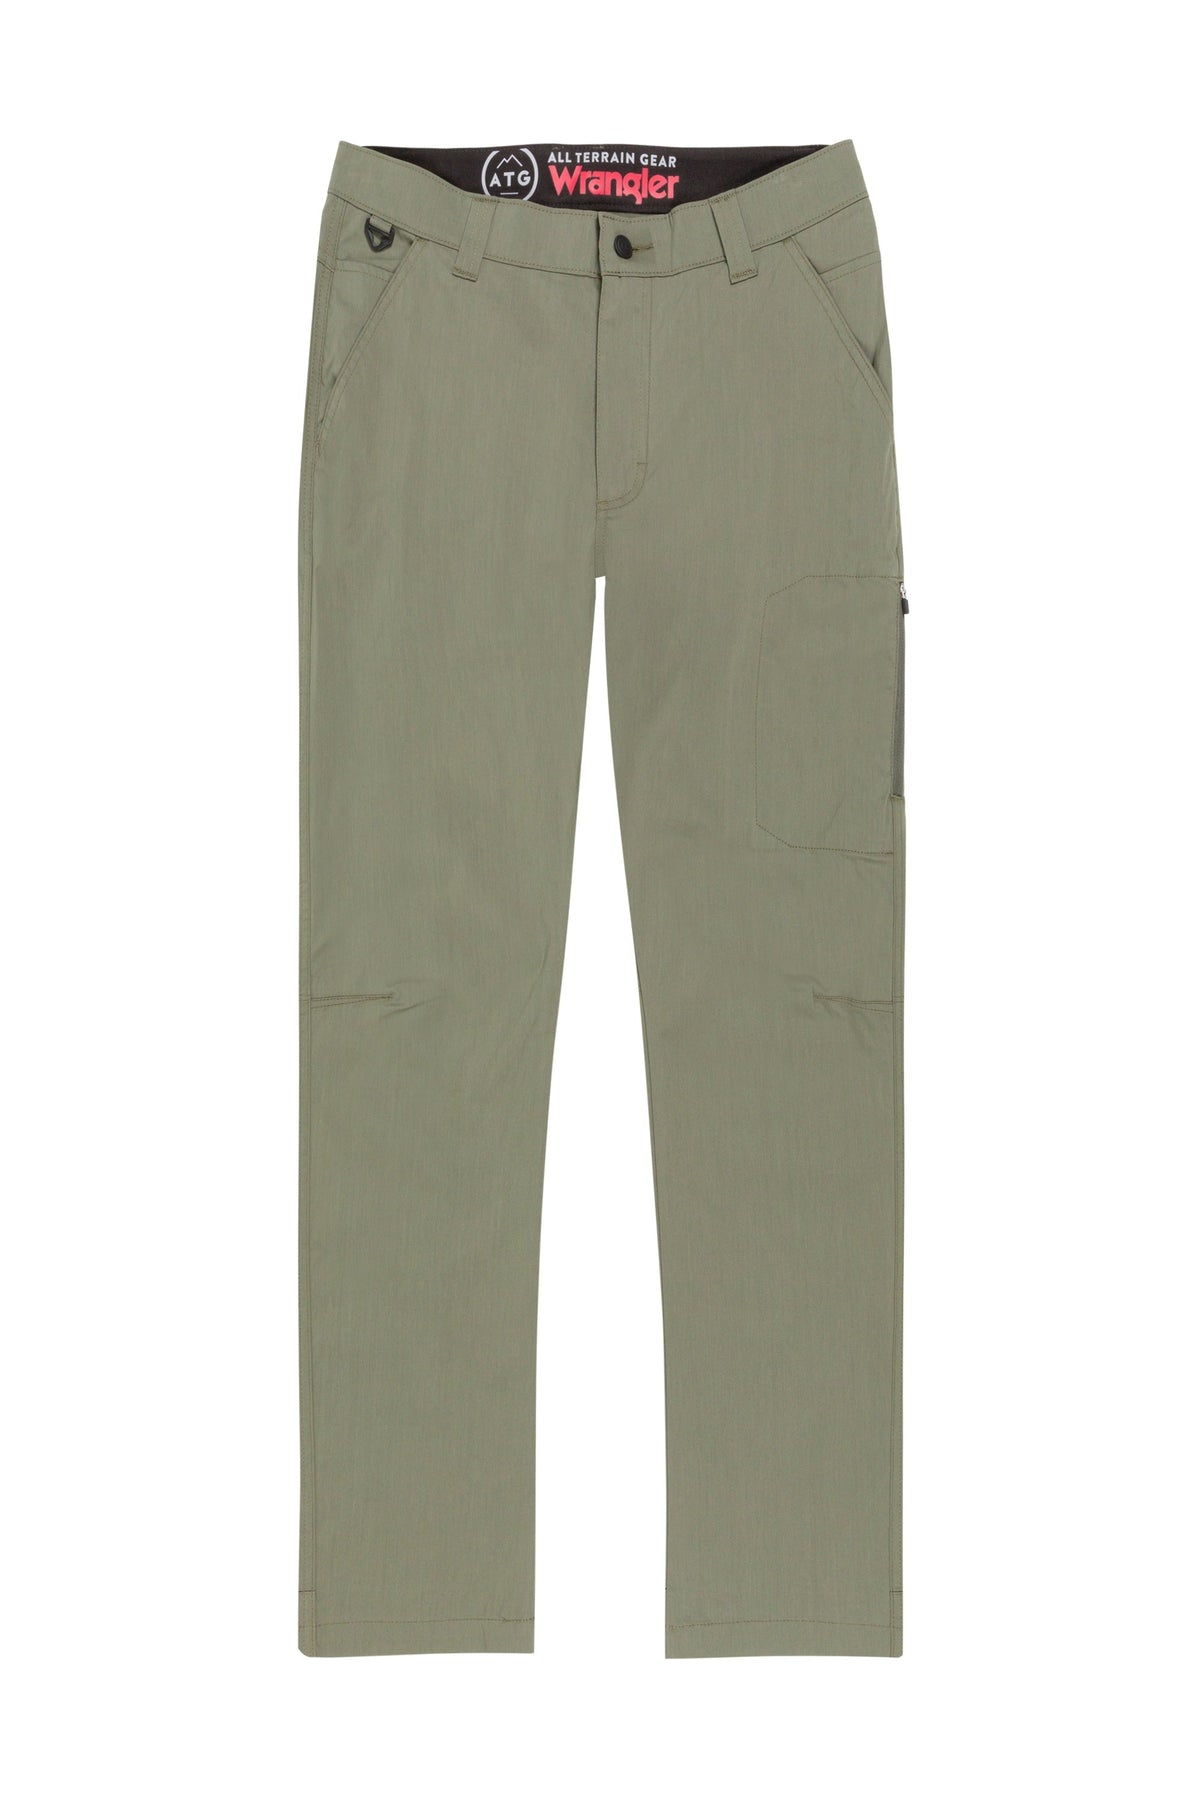 All Terrain Gear Sustainable Utility Pant in Dusty Olive